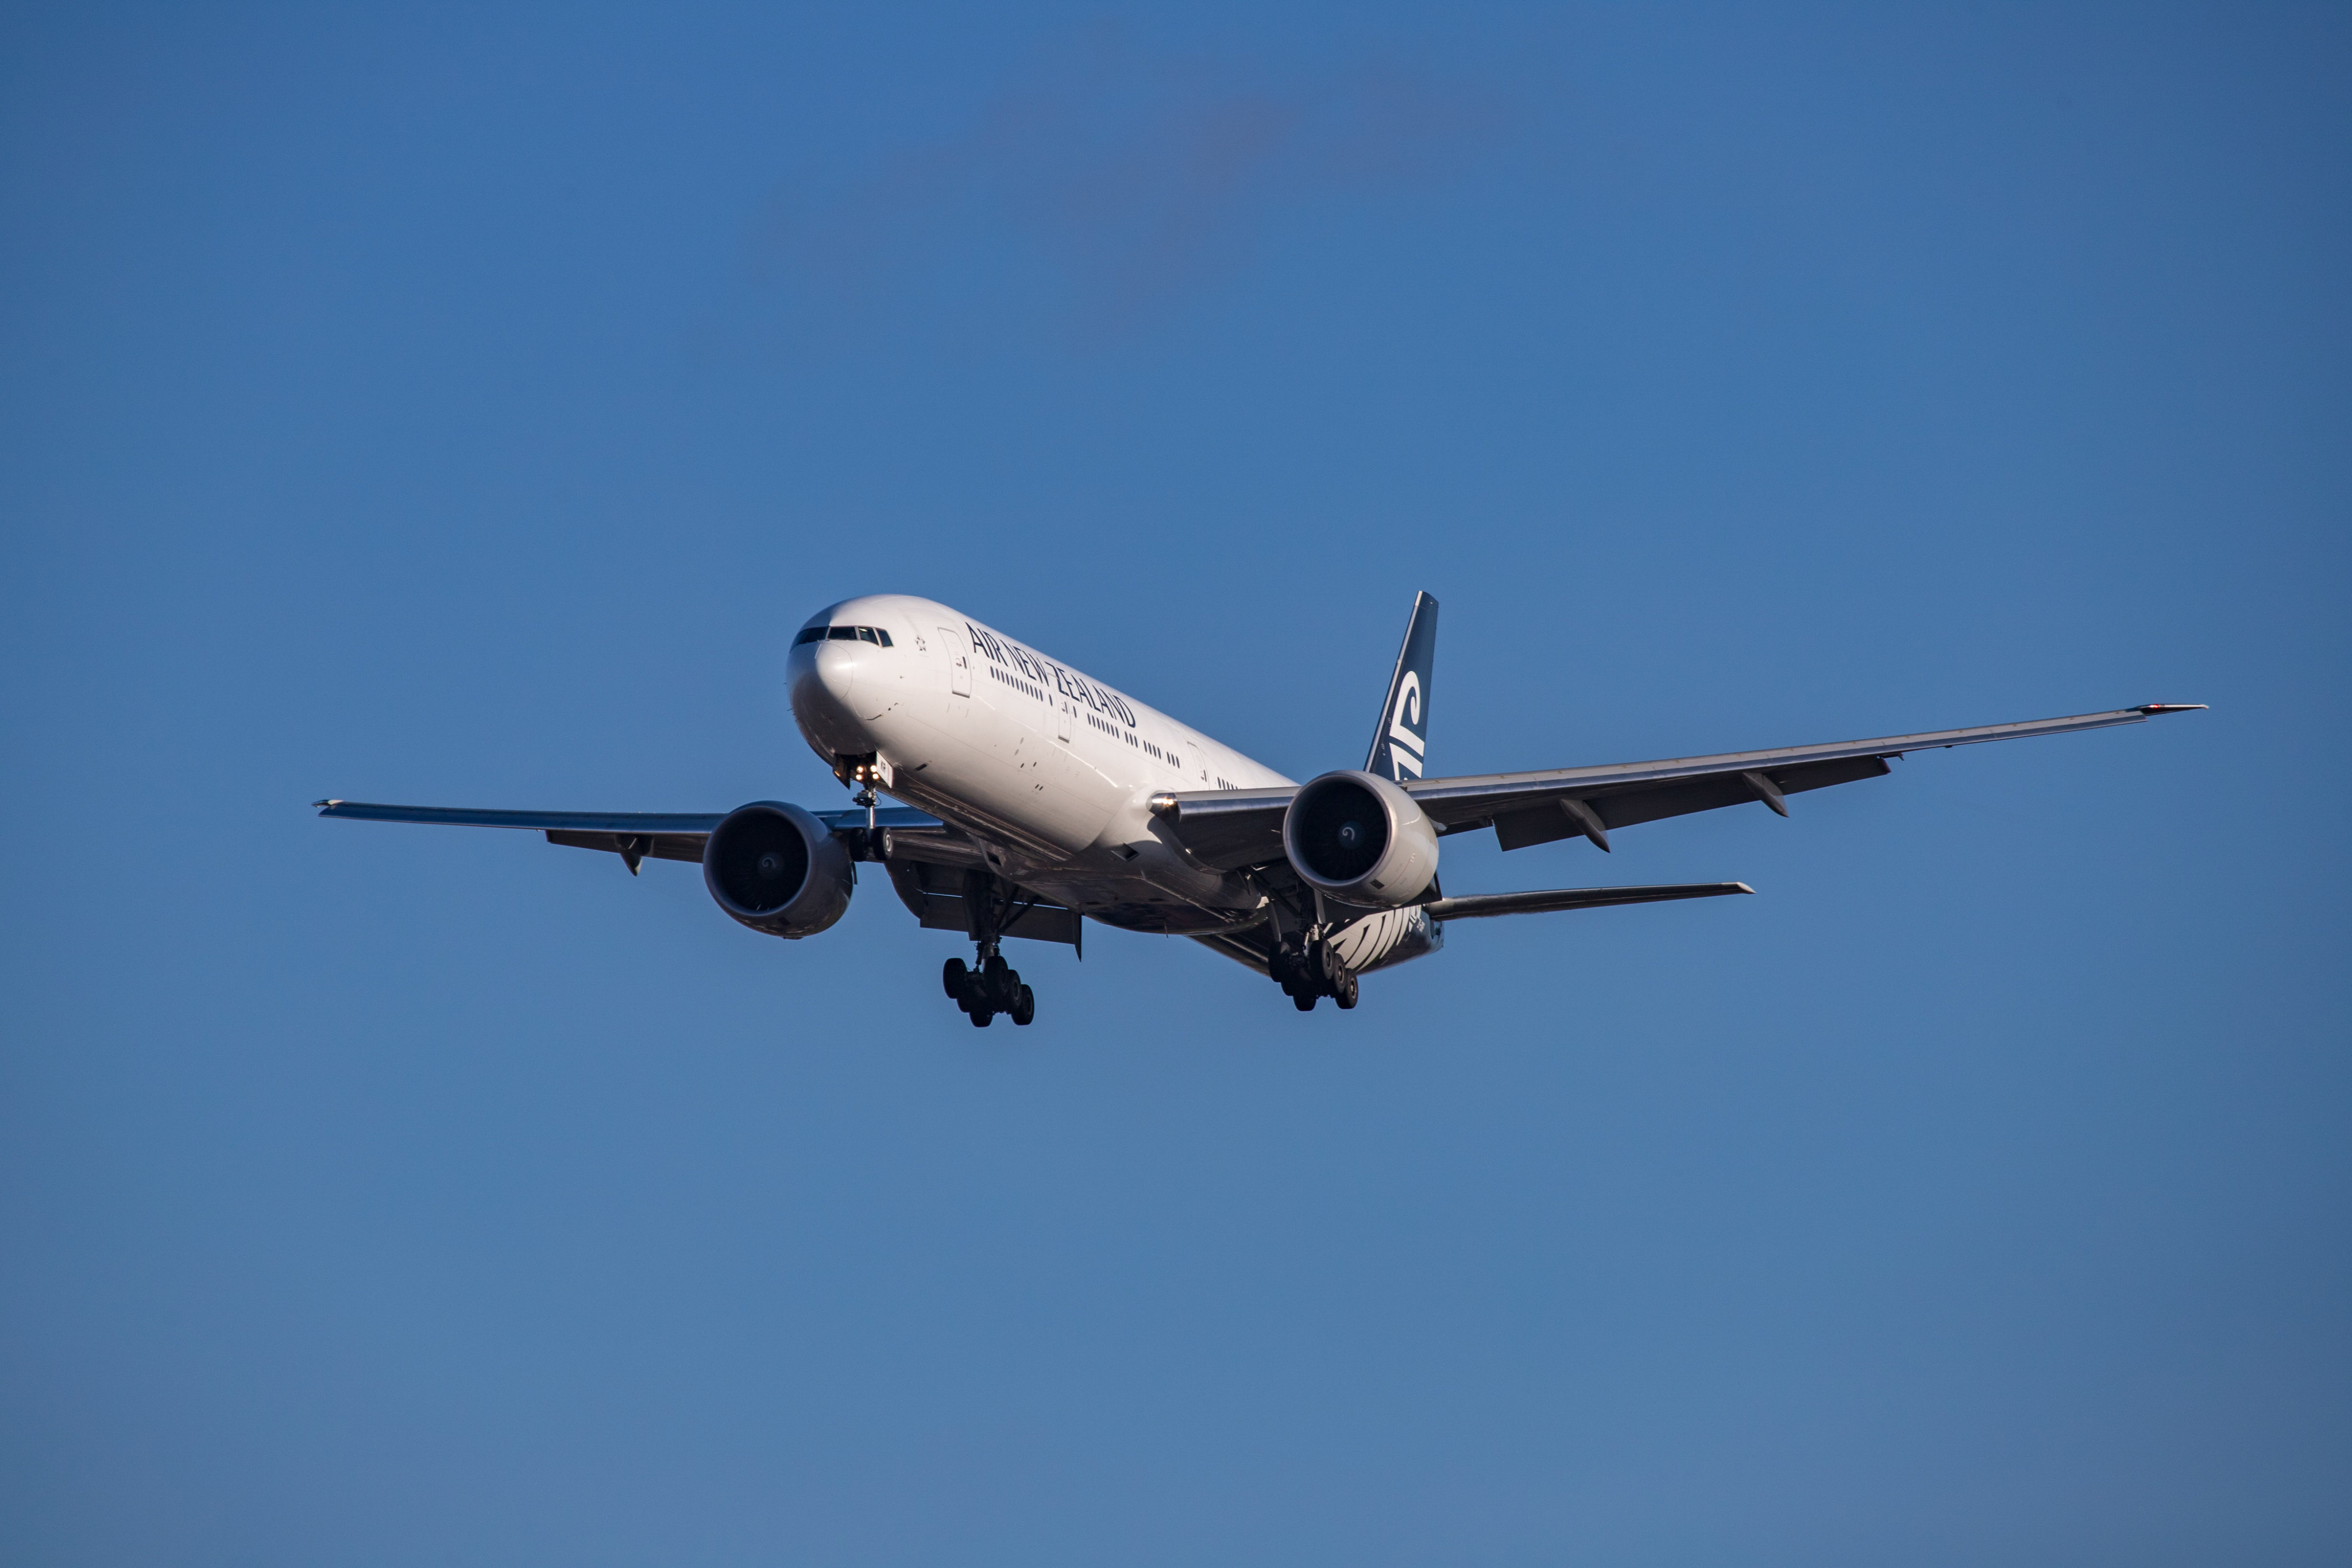 A passenger on an Air New Zealand flight suffered a broken leg after the jet experienced severe turbulence. Photo: Getty Images